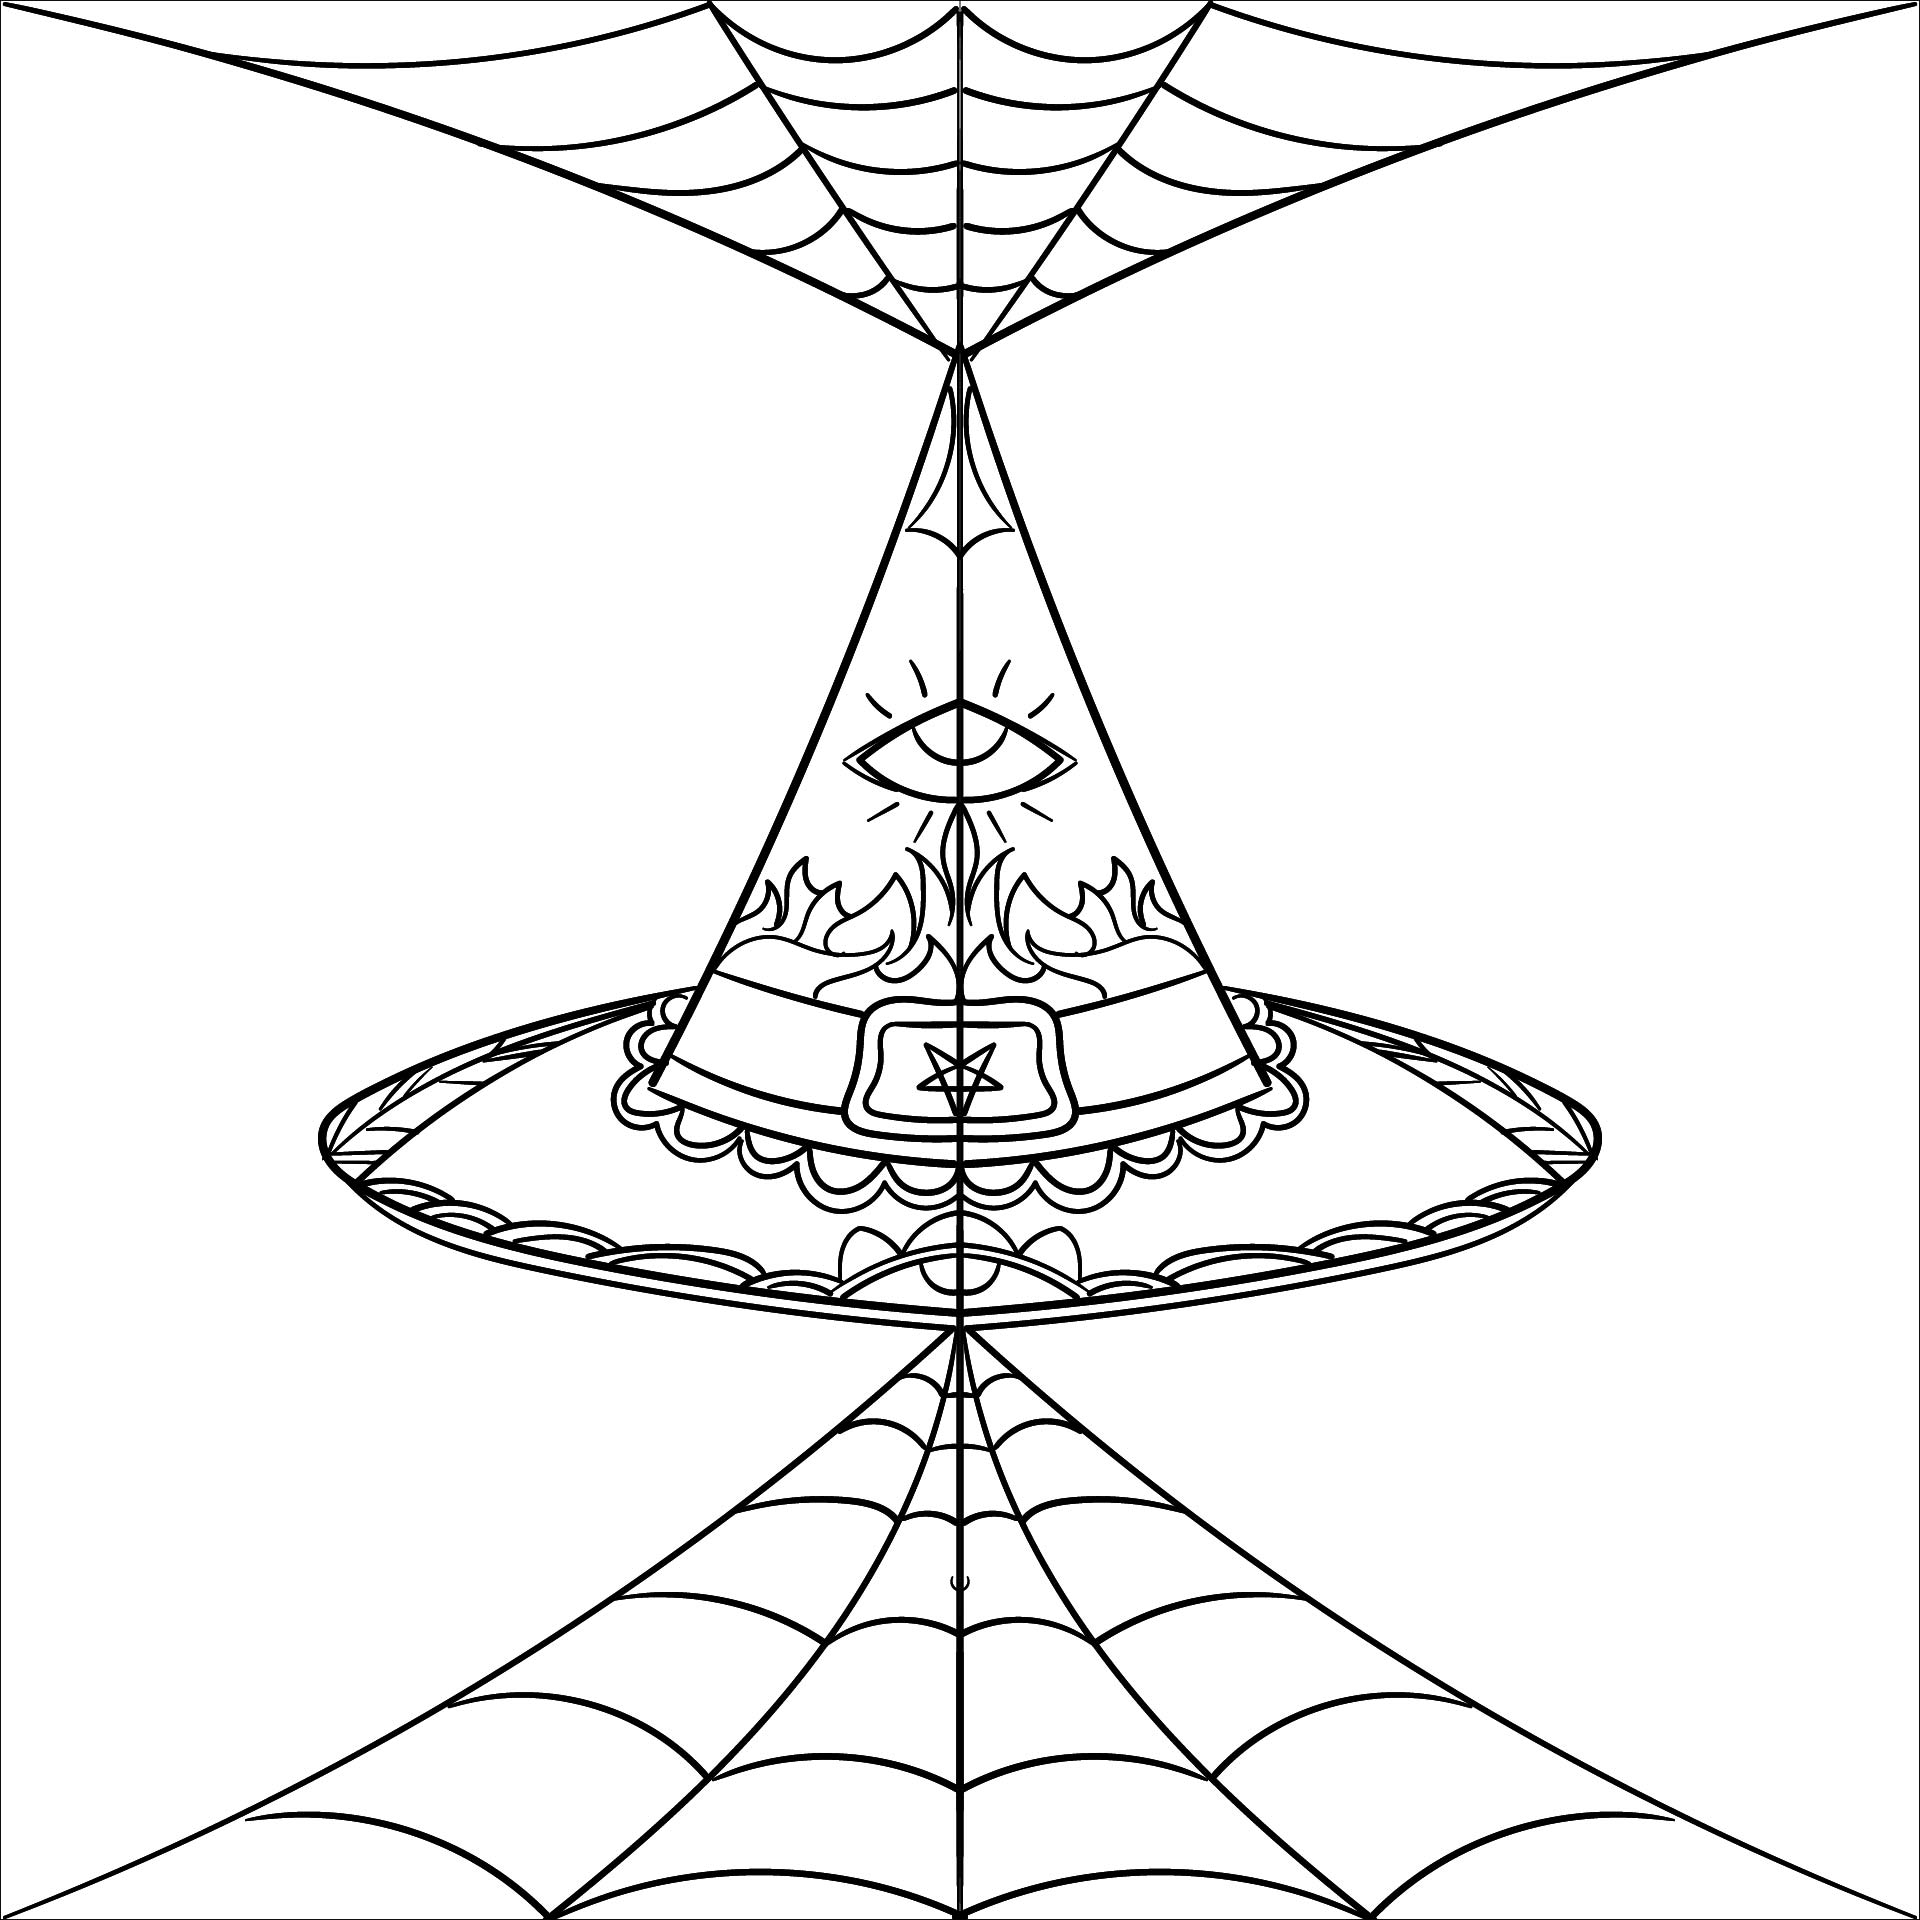 Halloween Mandala With Witch Hats And Spider Web